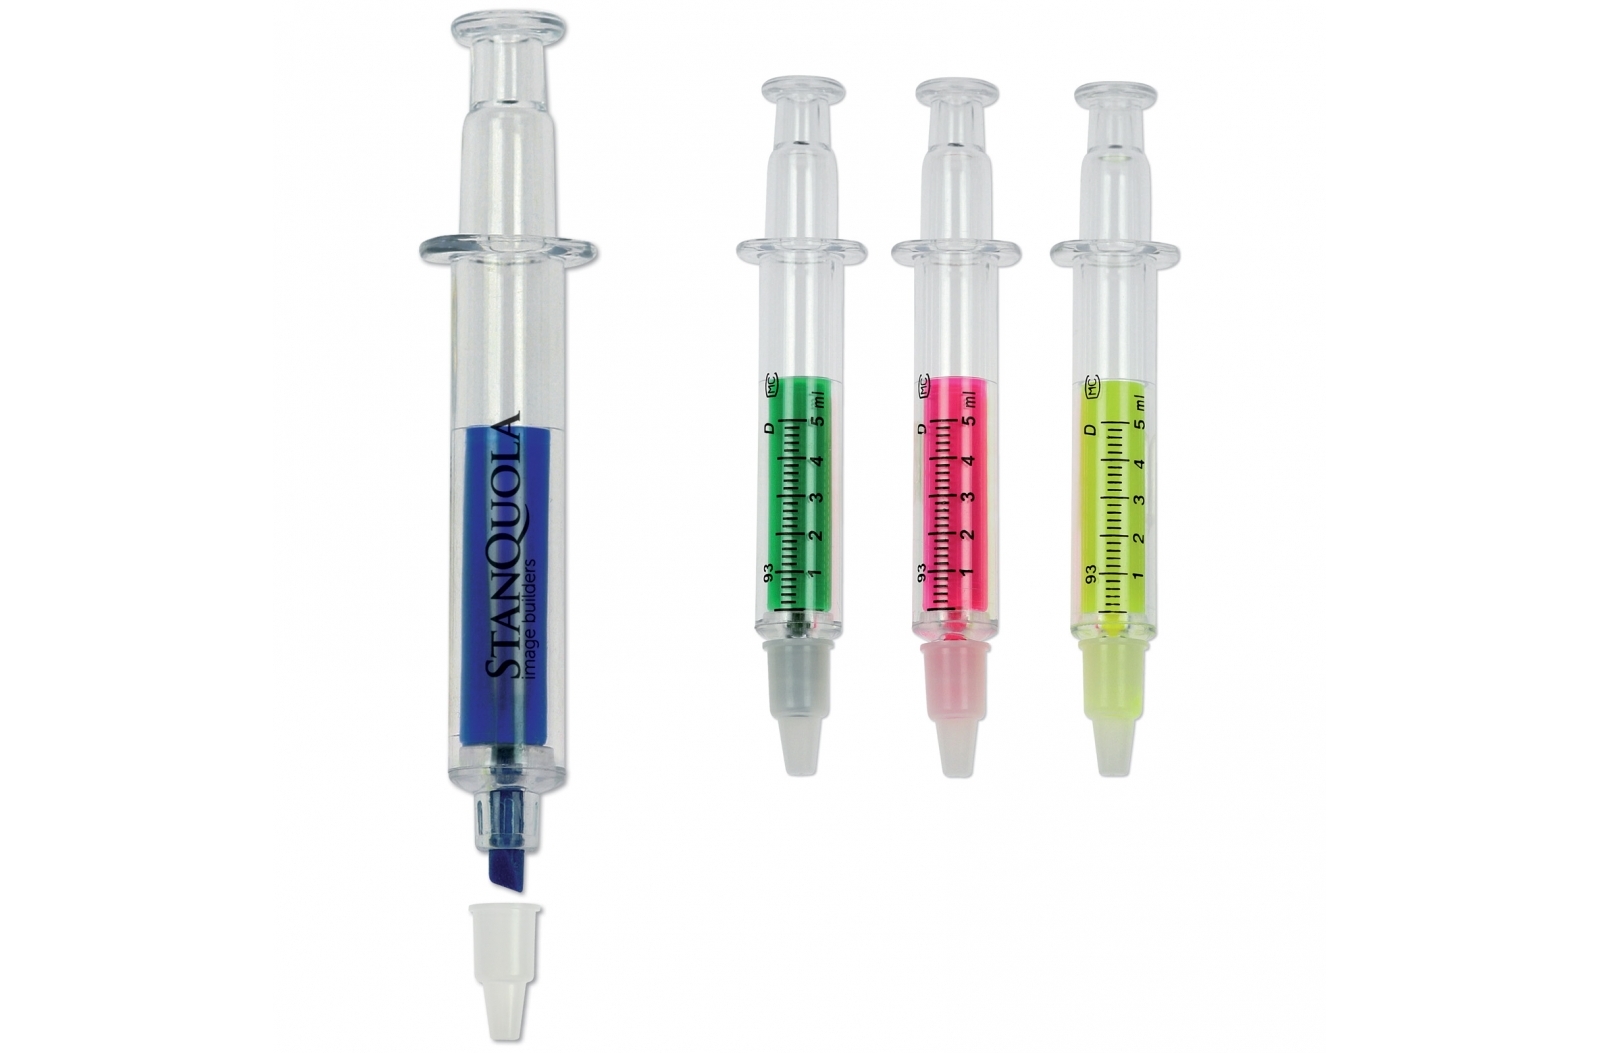 A highlighter that has a clear, colored body which is filled with ink using an injection method - Ashby-in-the-Water